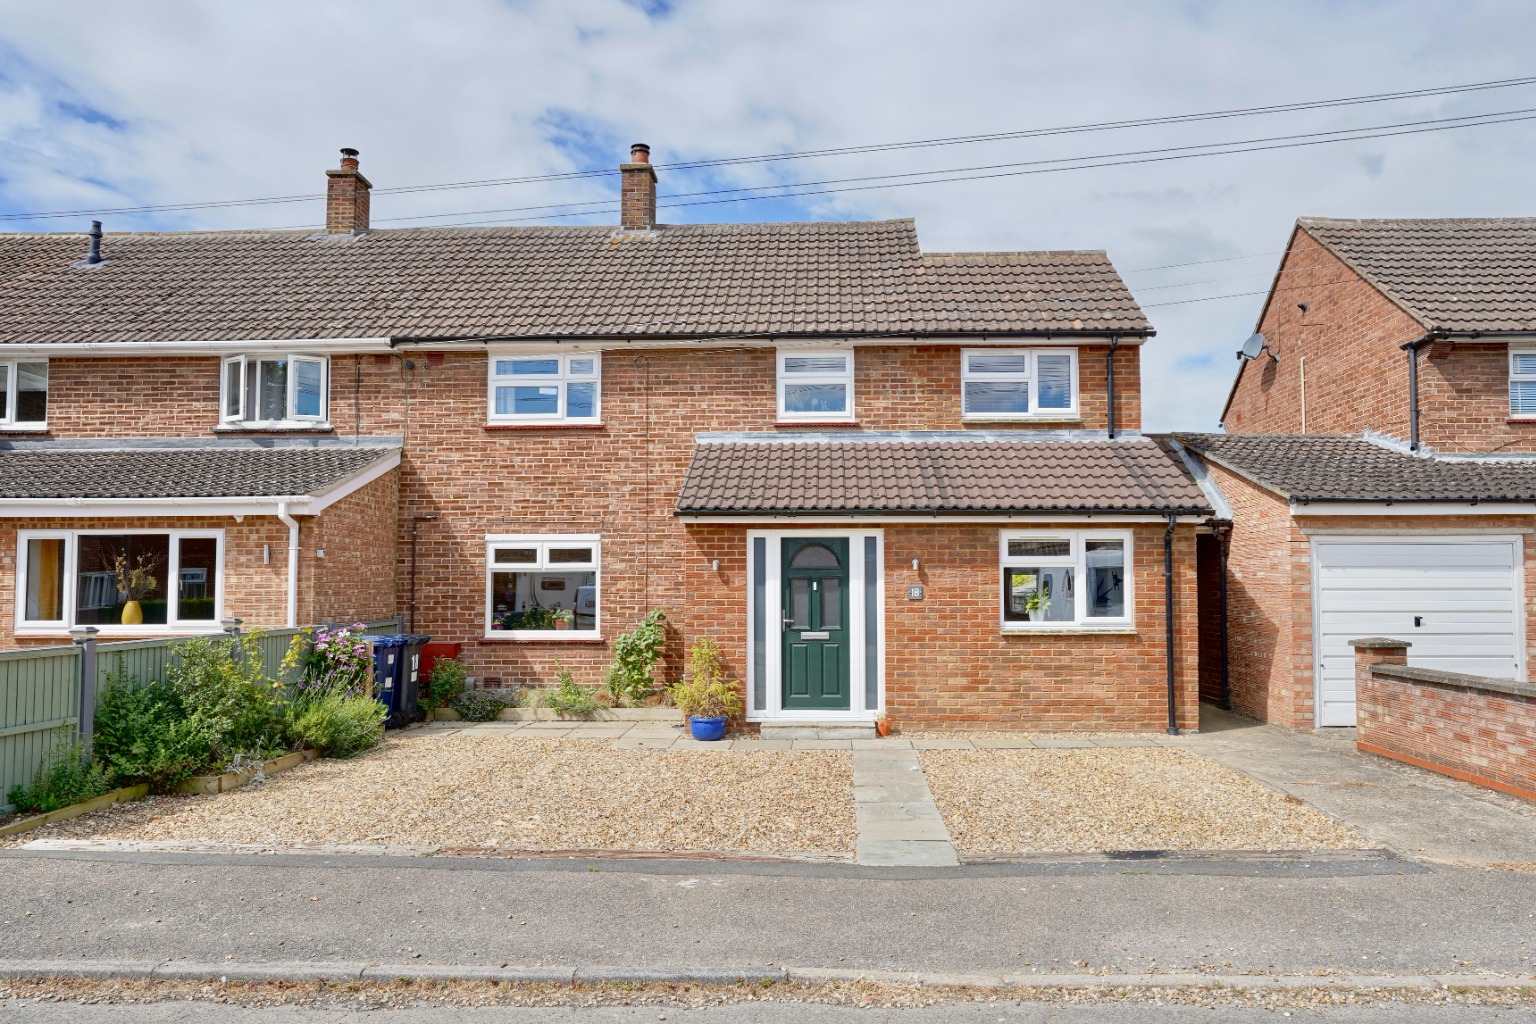 4 bed  for sale in Wantage Gardens, St. Neots, PE19